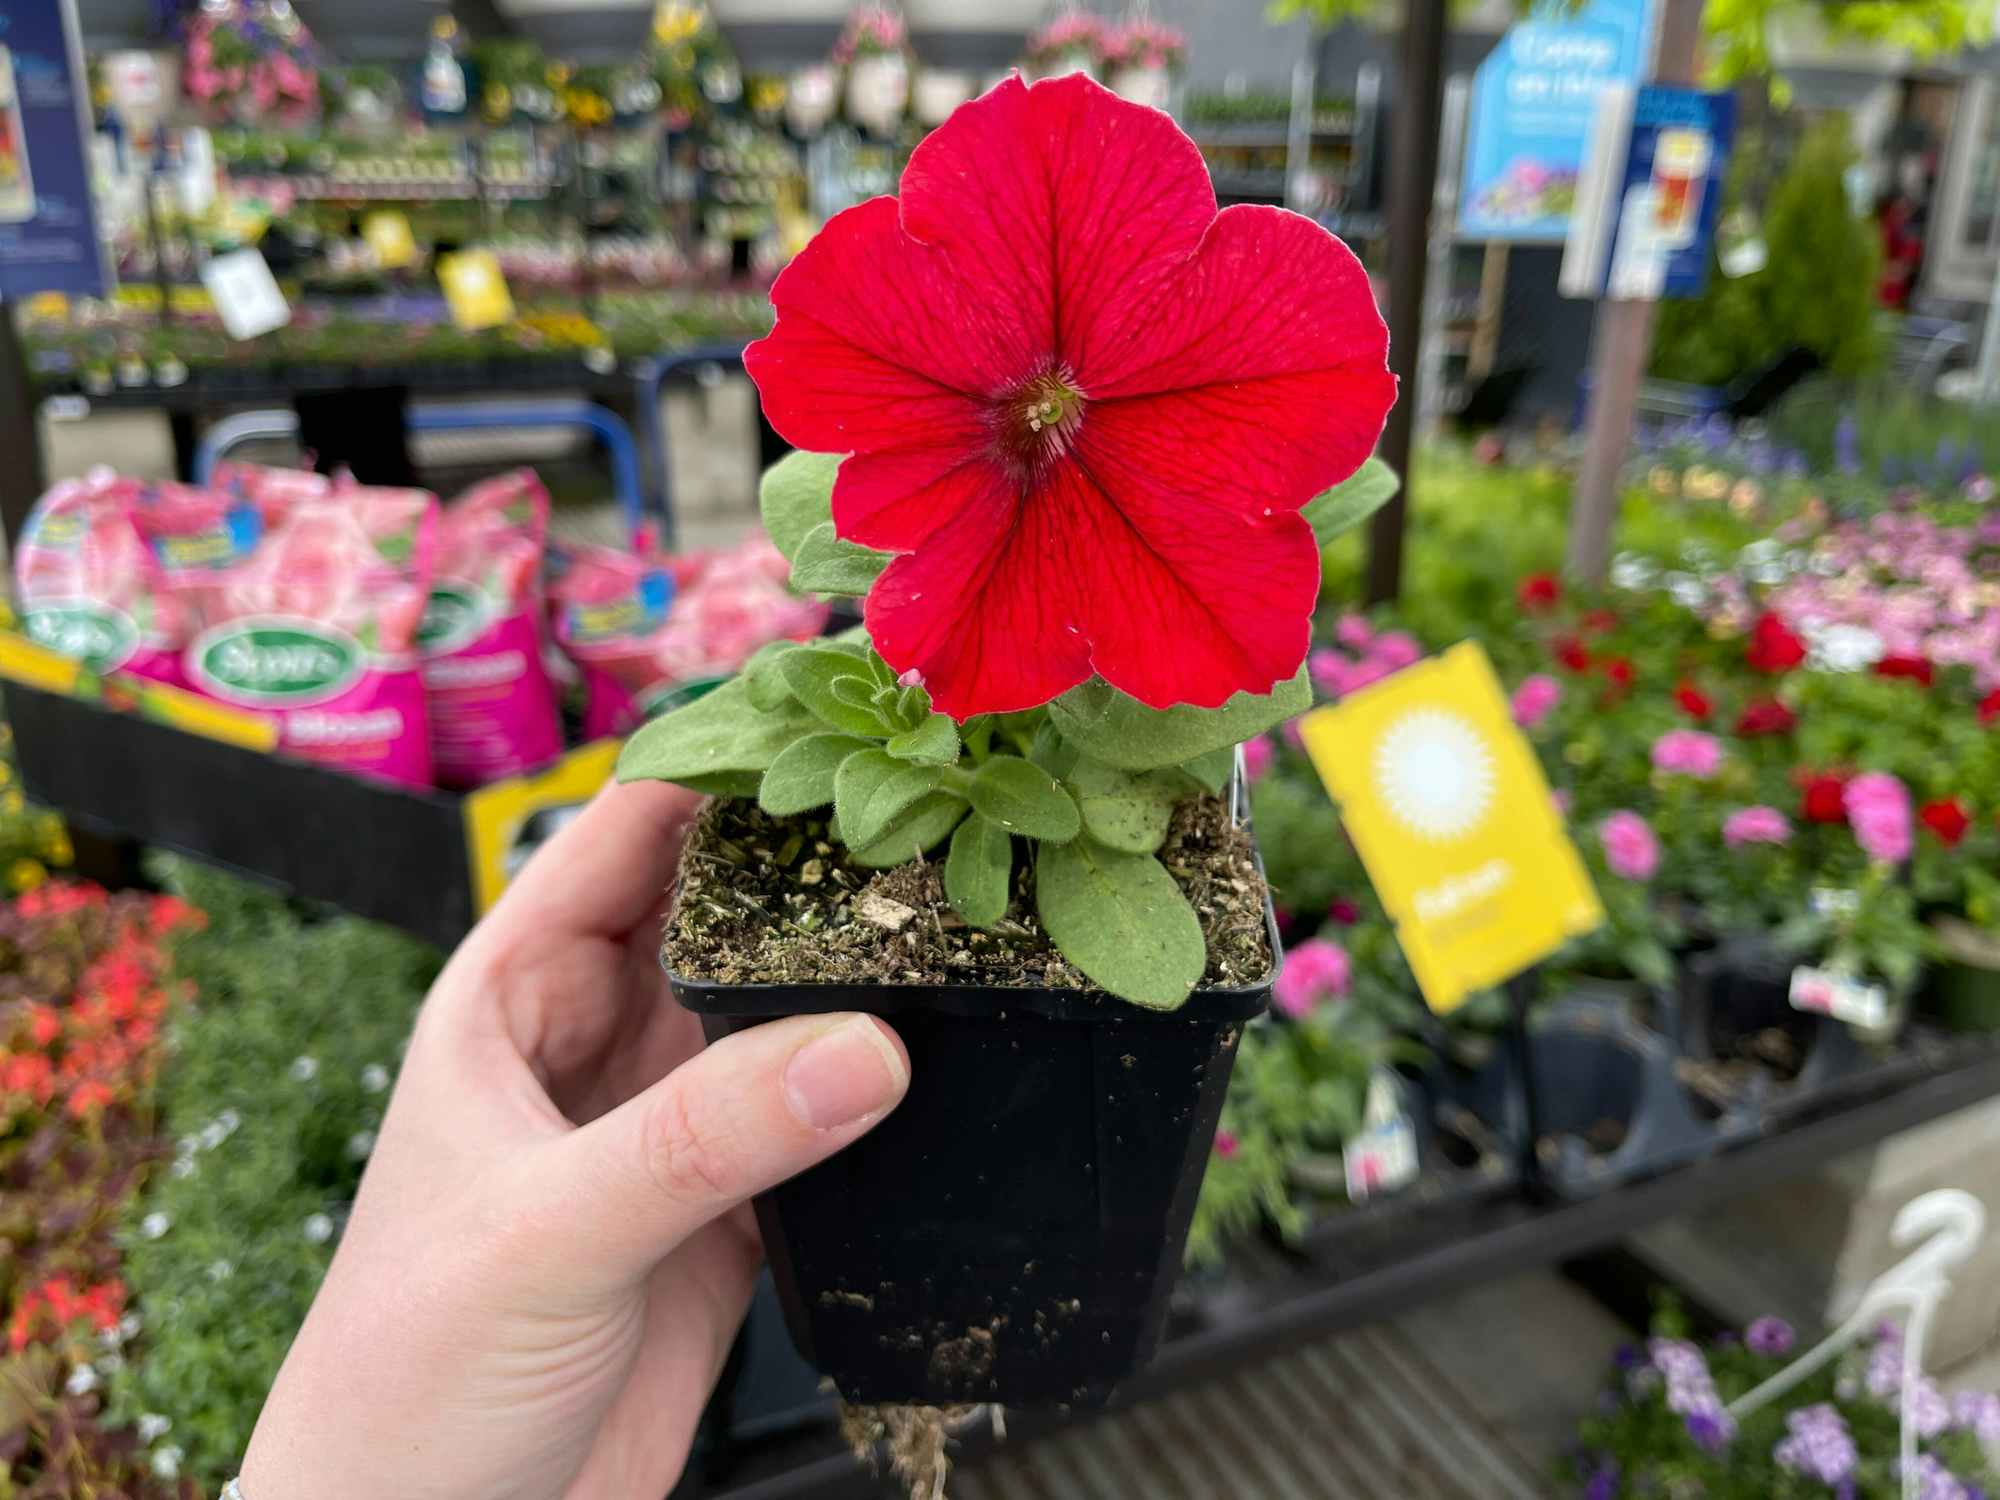 Someone holding up a free annual plant in the Lowe's Garden Center